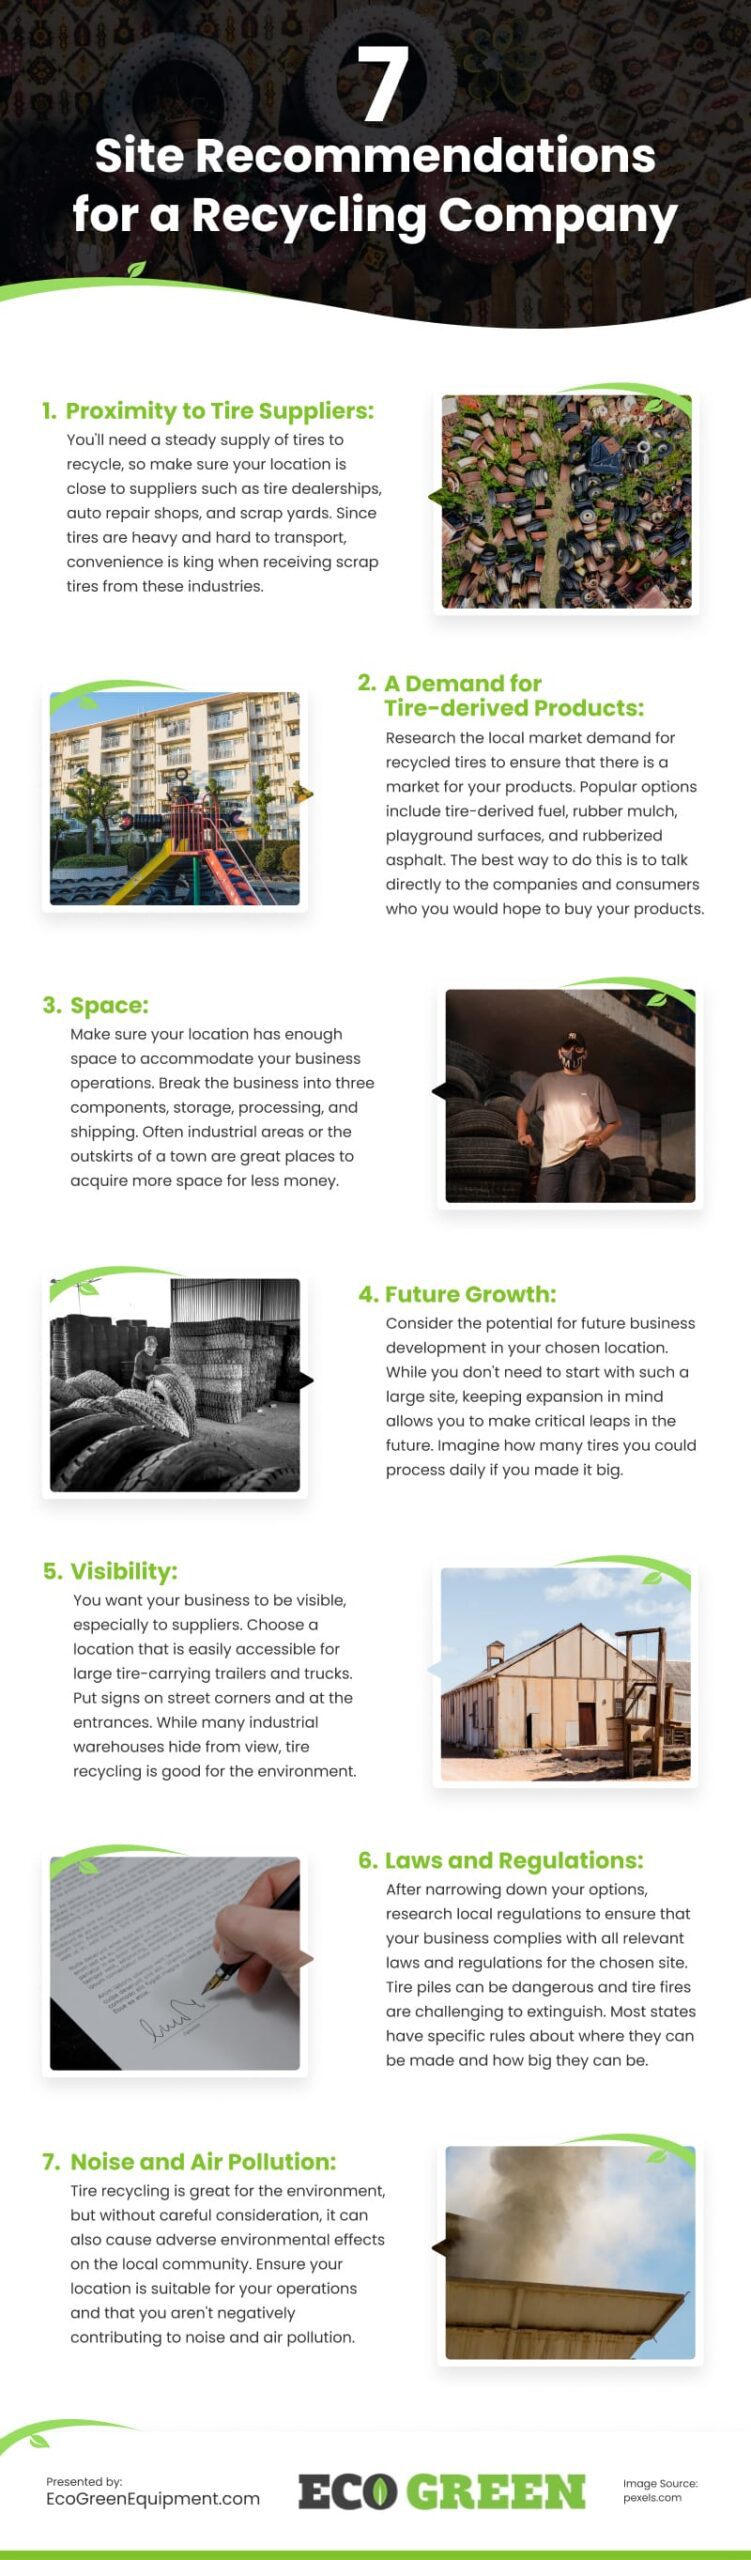 7 Site Recommendations for a Recycling Company Infographic